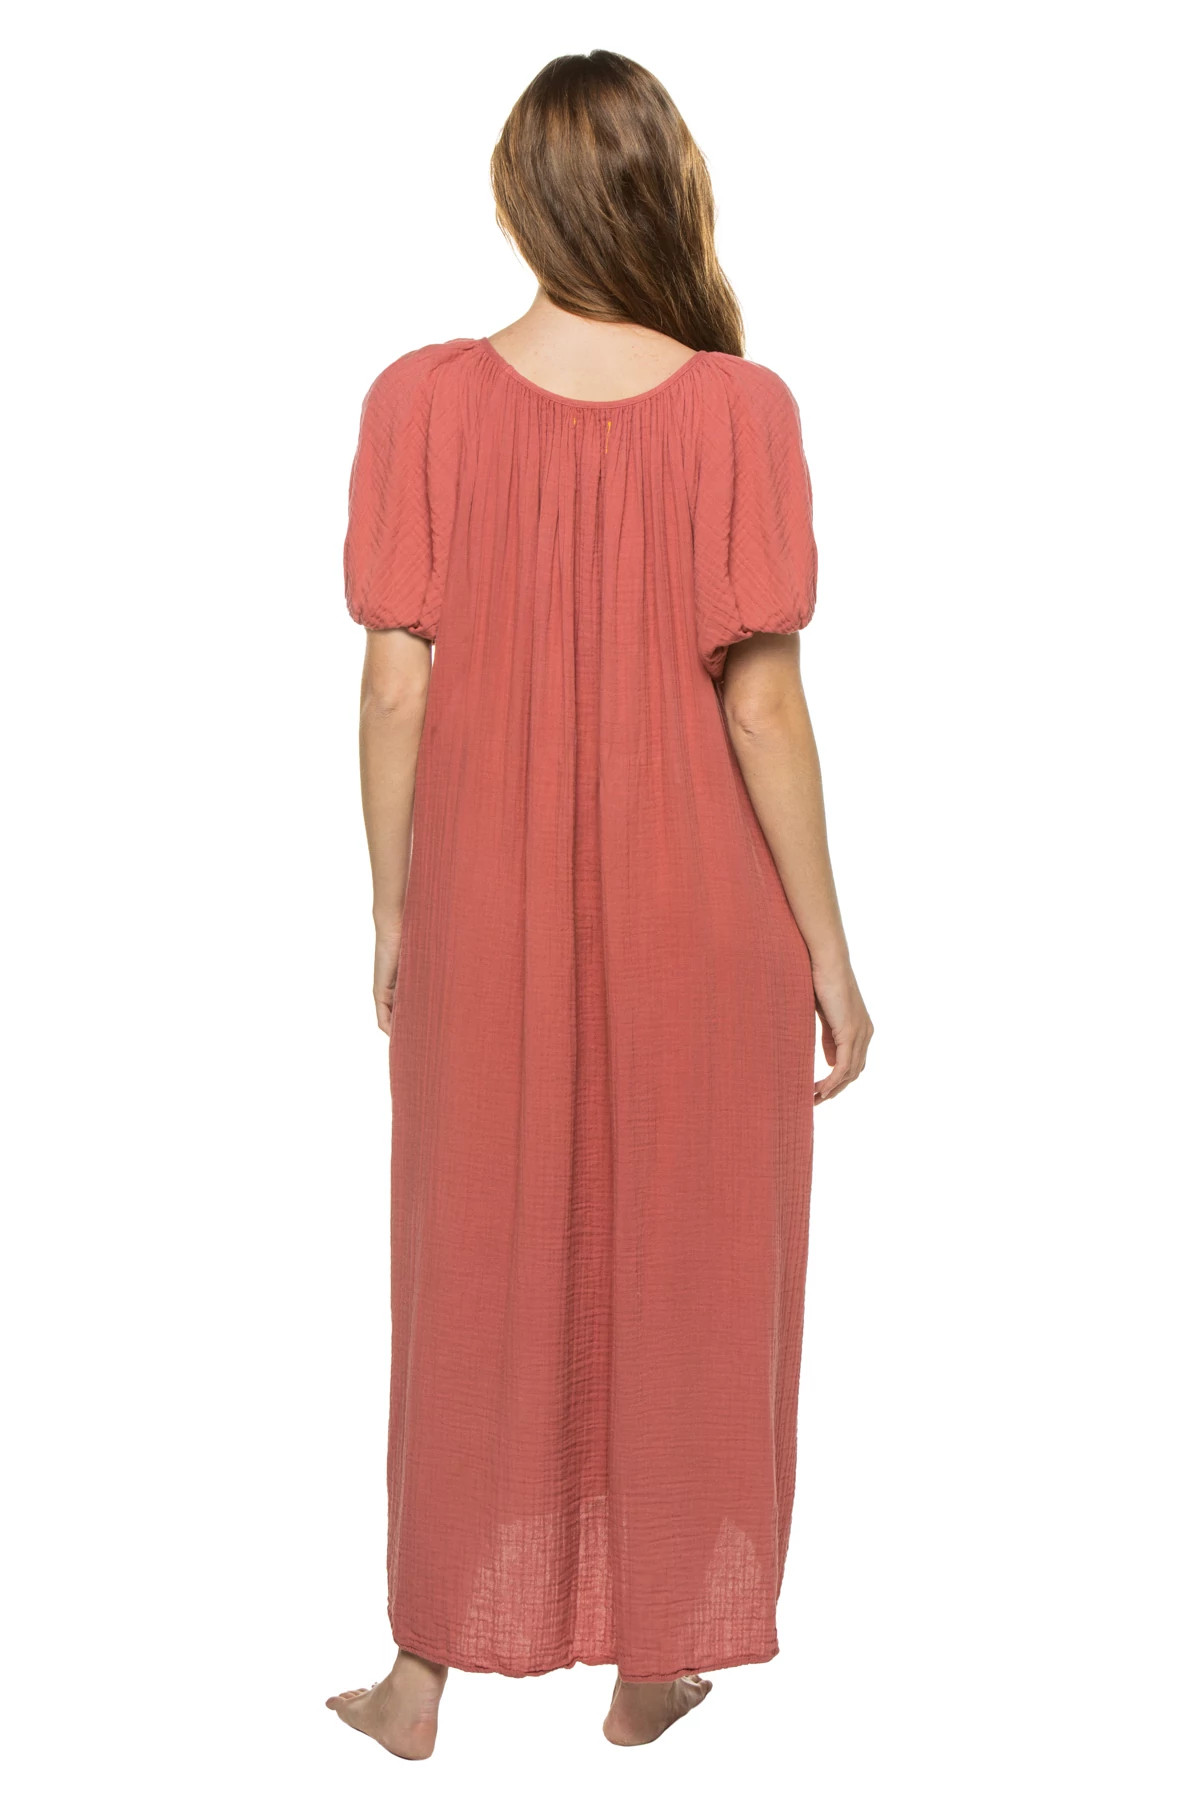 GUAVA Sand Hill Cove Dress image number 2